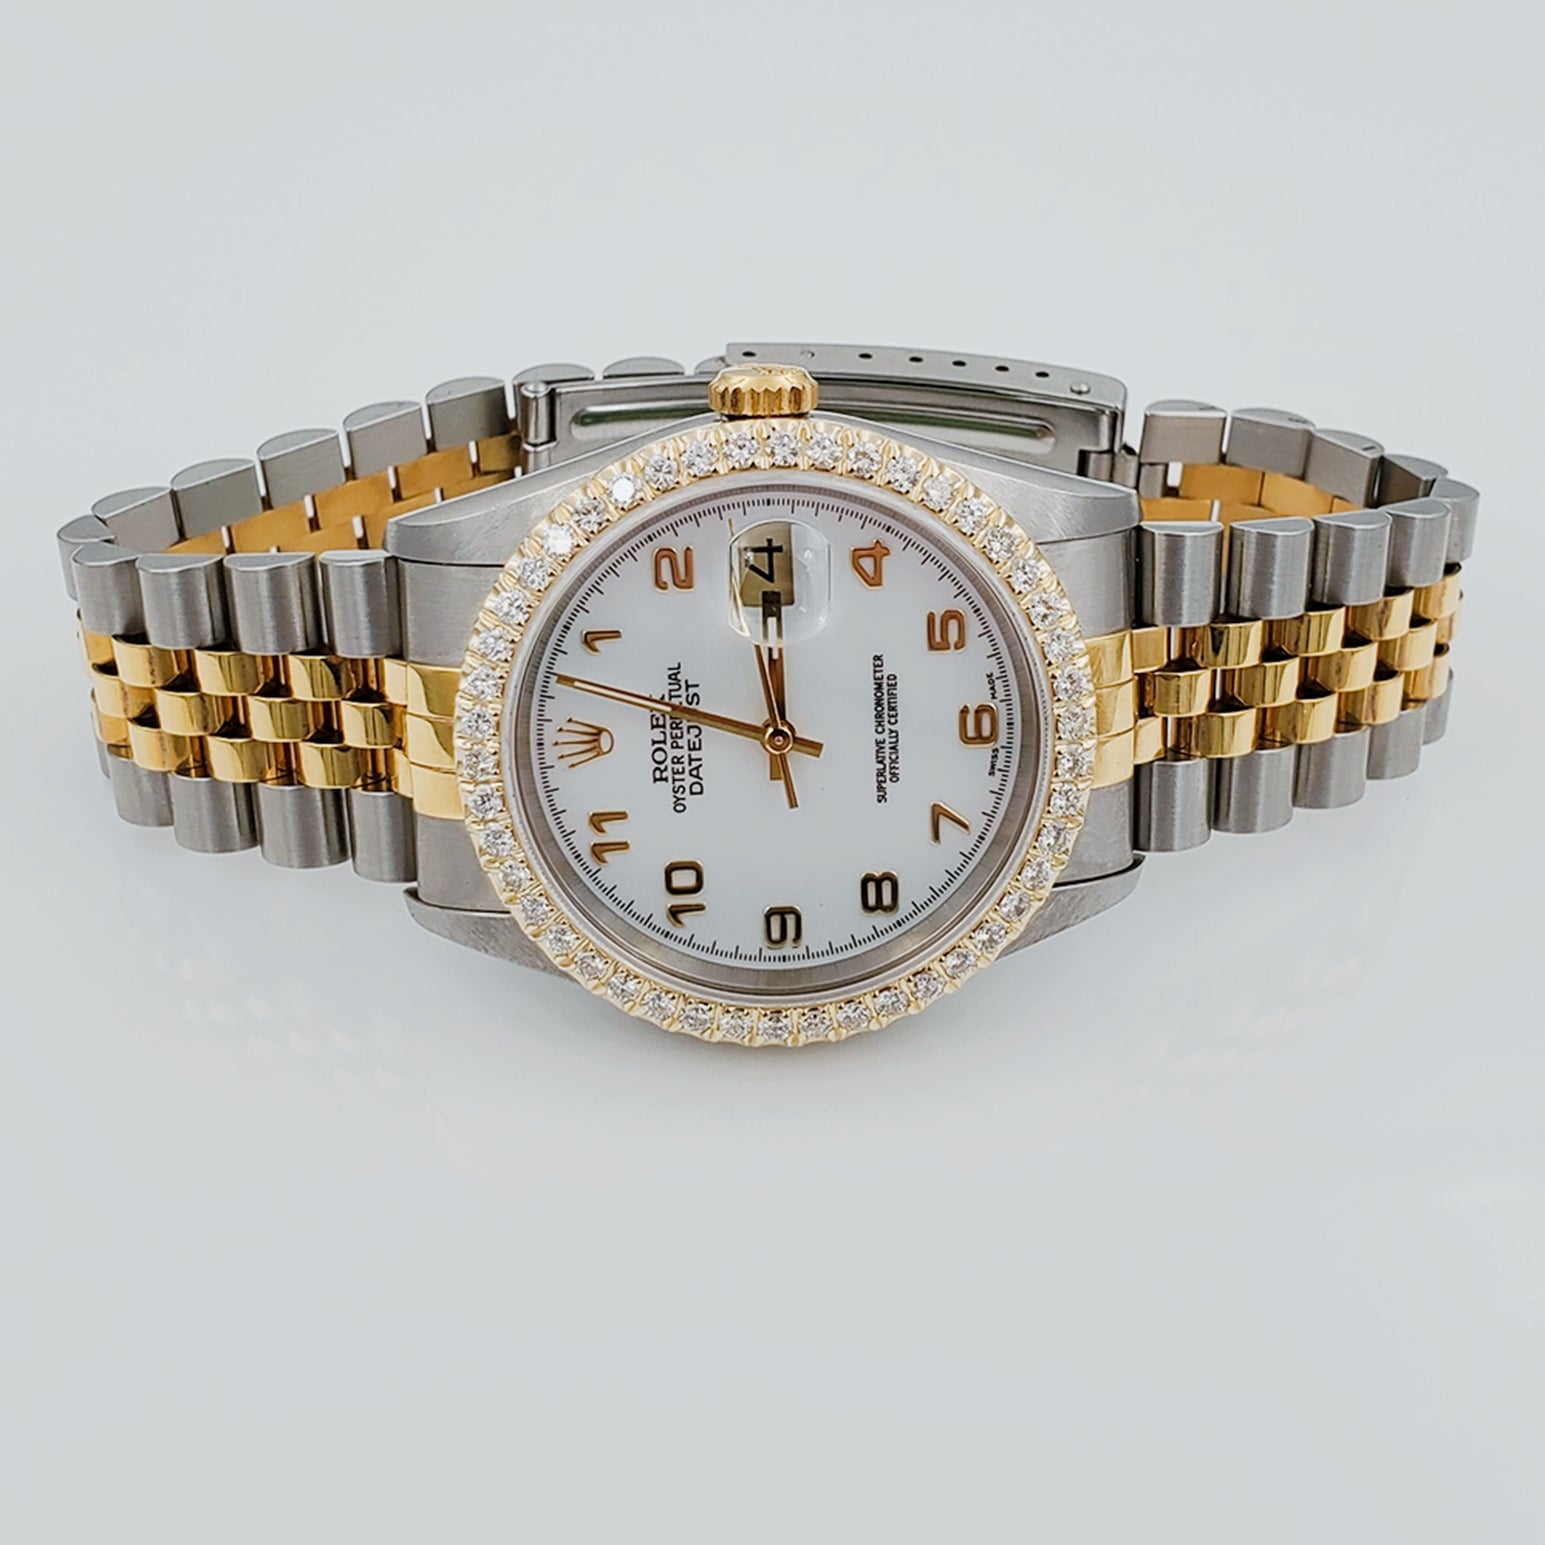 Men's Rolex 36mm DateJust 18K Gold / Stainless Steel Two Tone Watch with White Dial and 1.5 CT Custom Diamond Bezel. (NEW 16233)